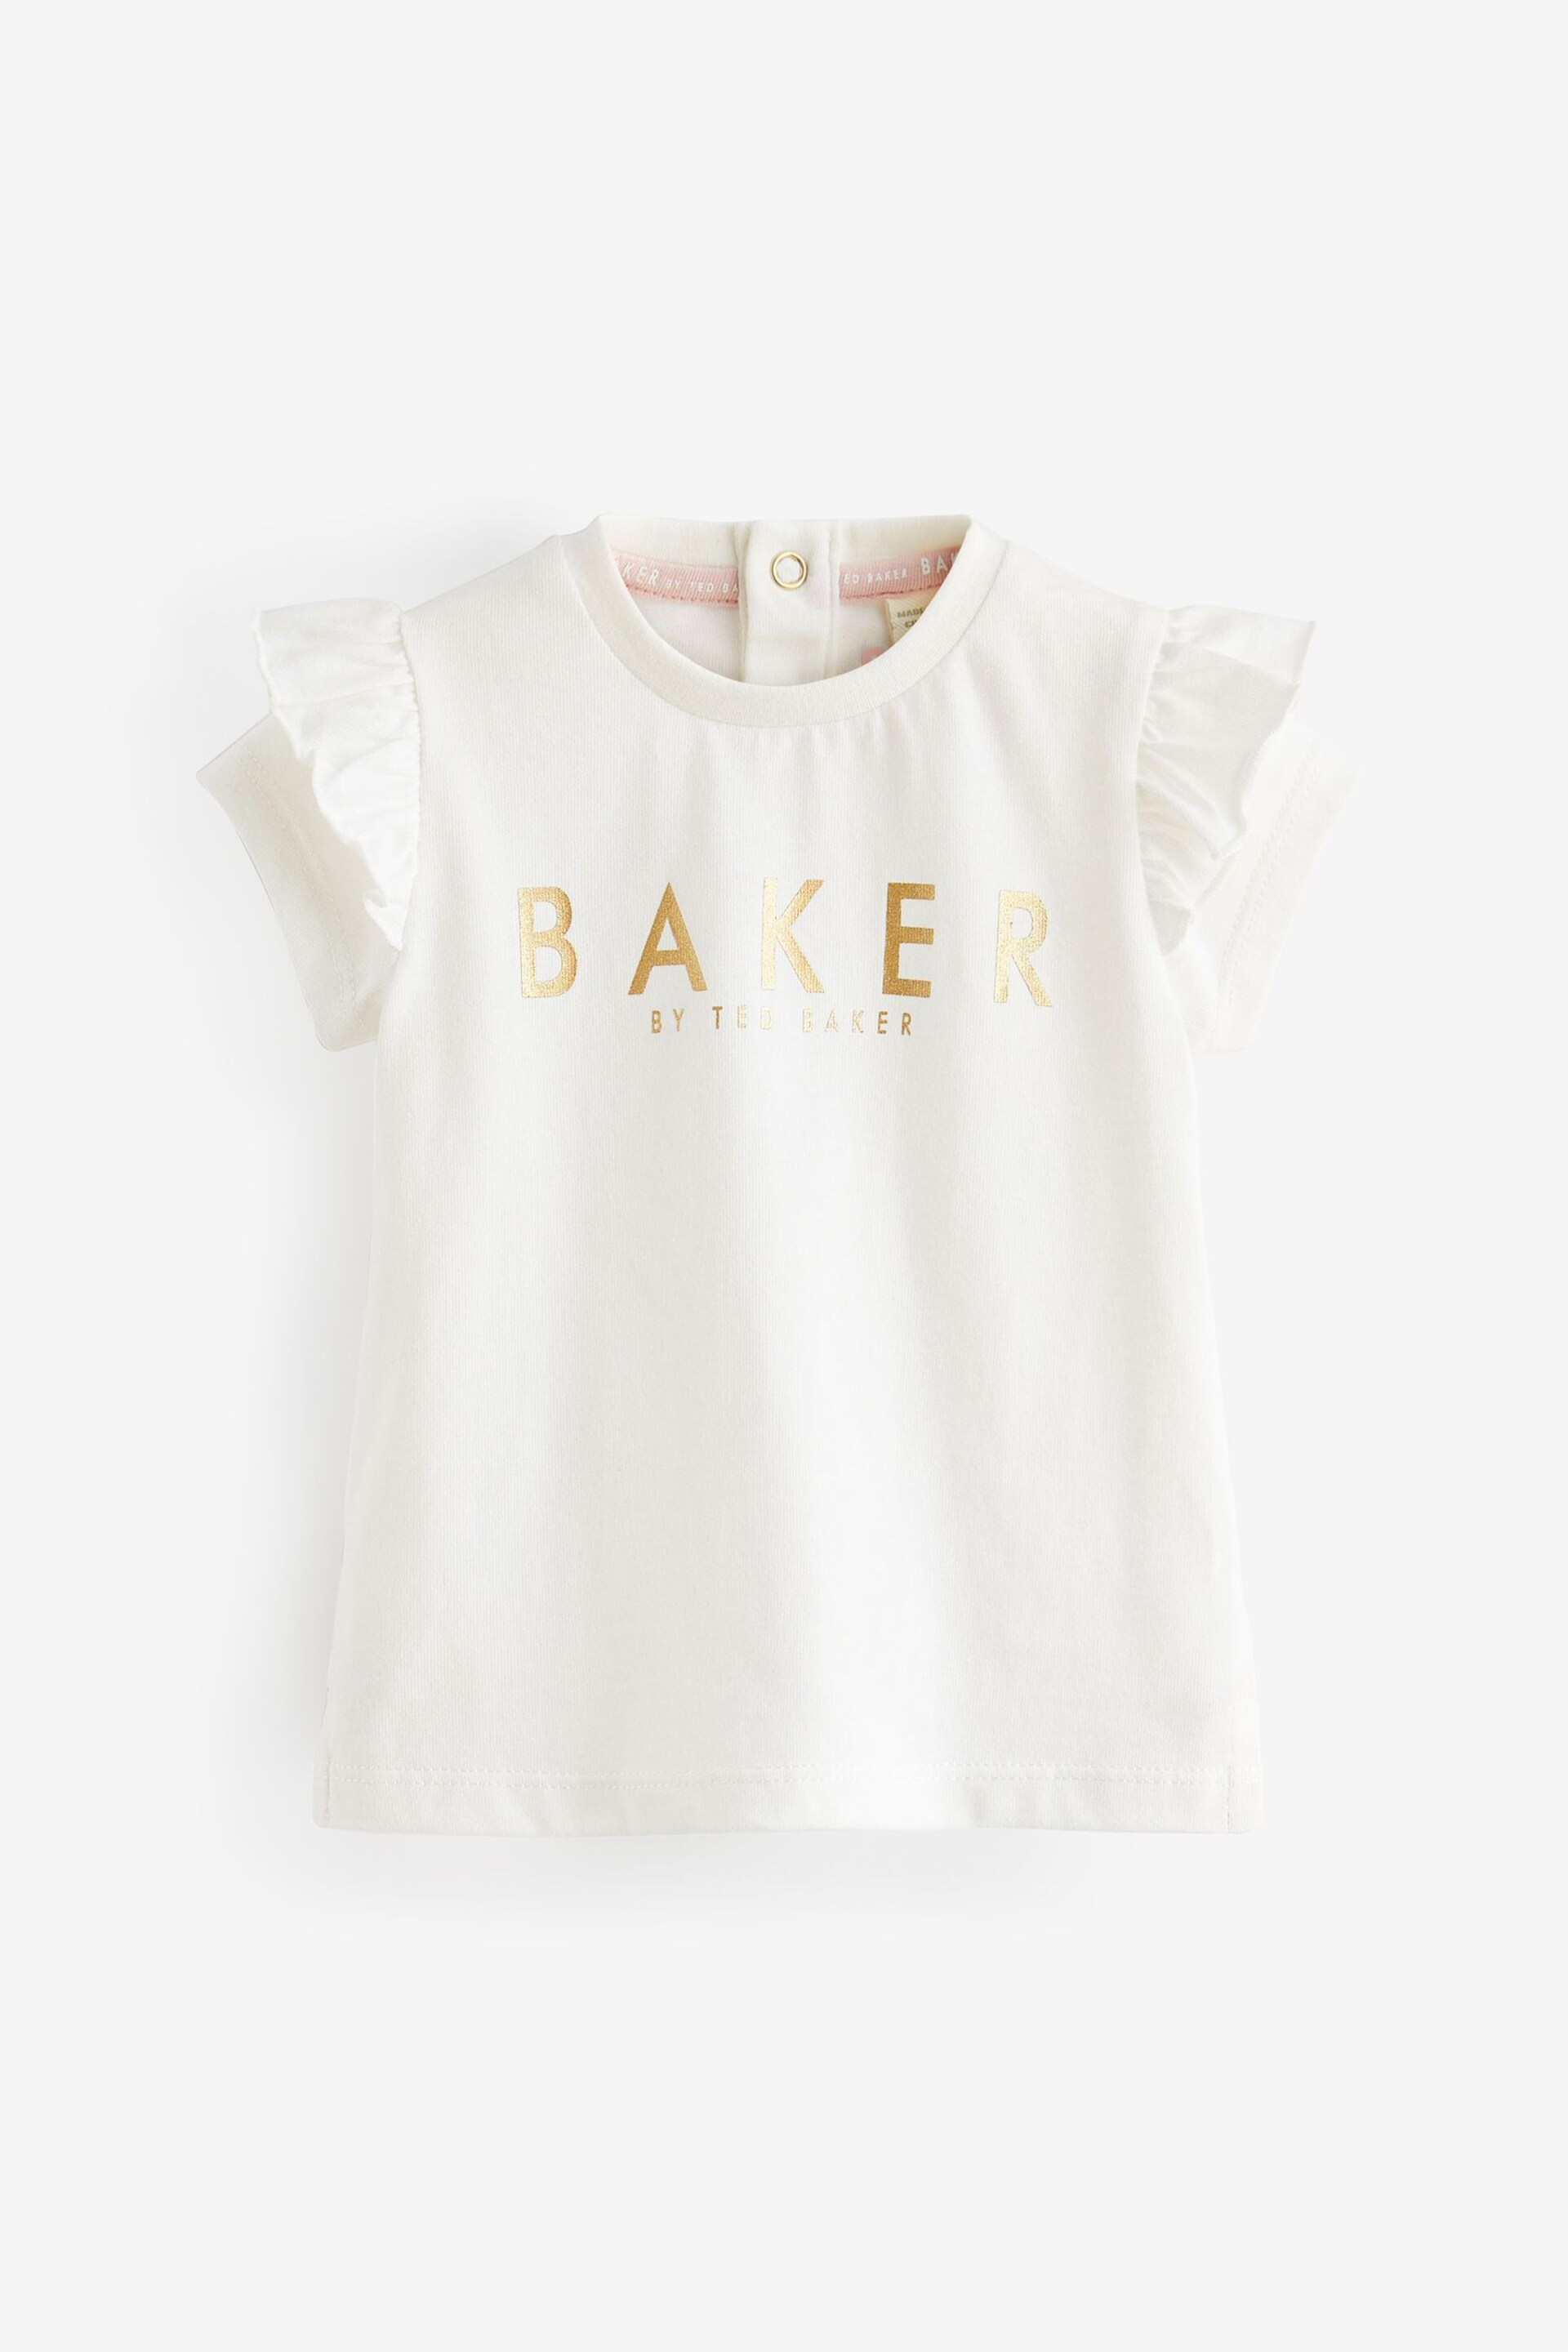 Baker by Ted Baker Floral Quilted Pinafore and T-Shirt Set - Image 8 of 10